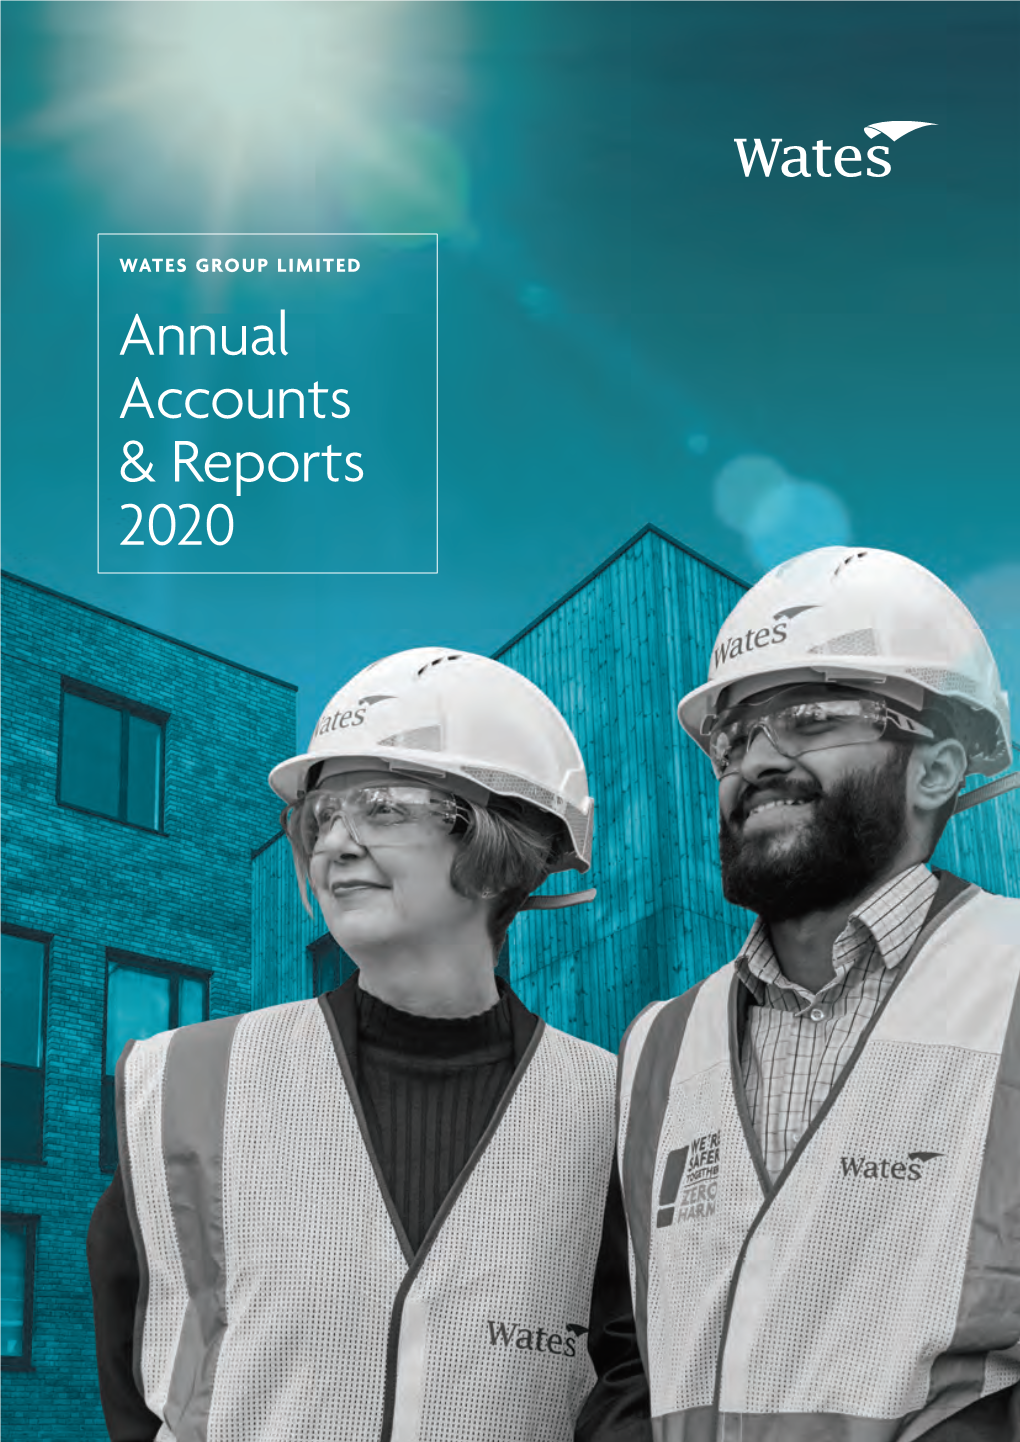 Annual Accounts & Reports 2020